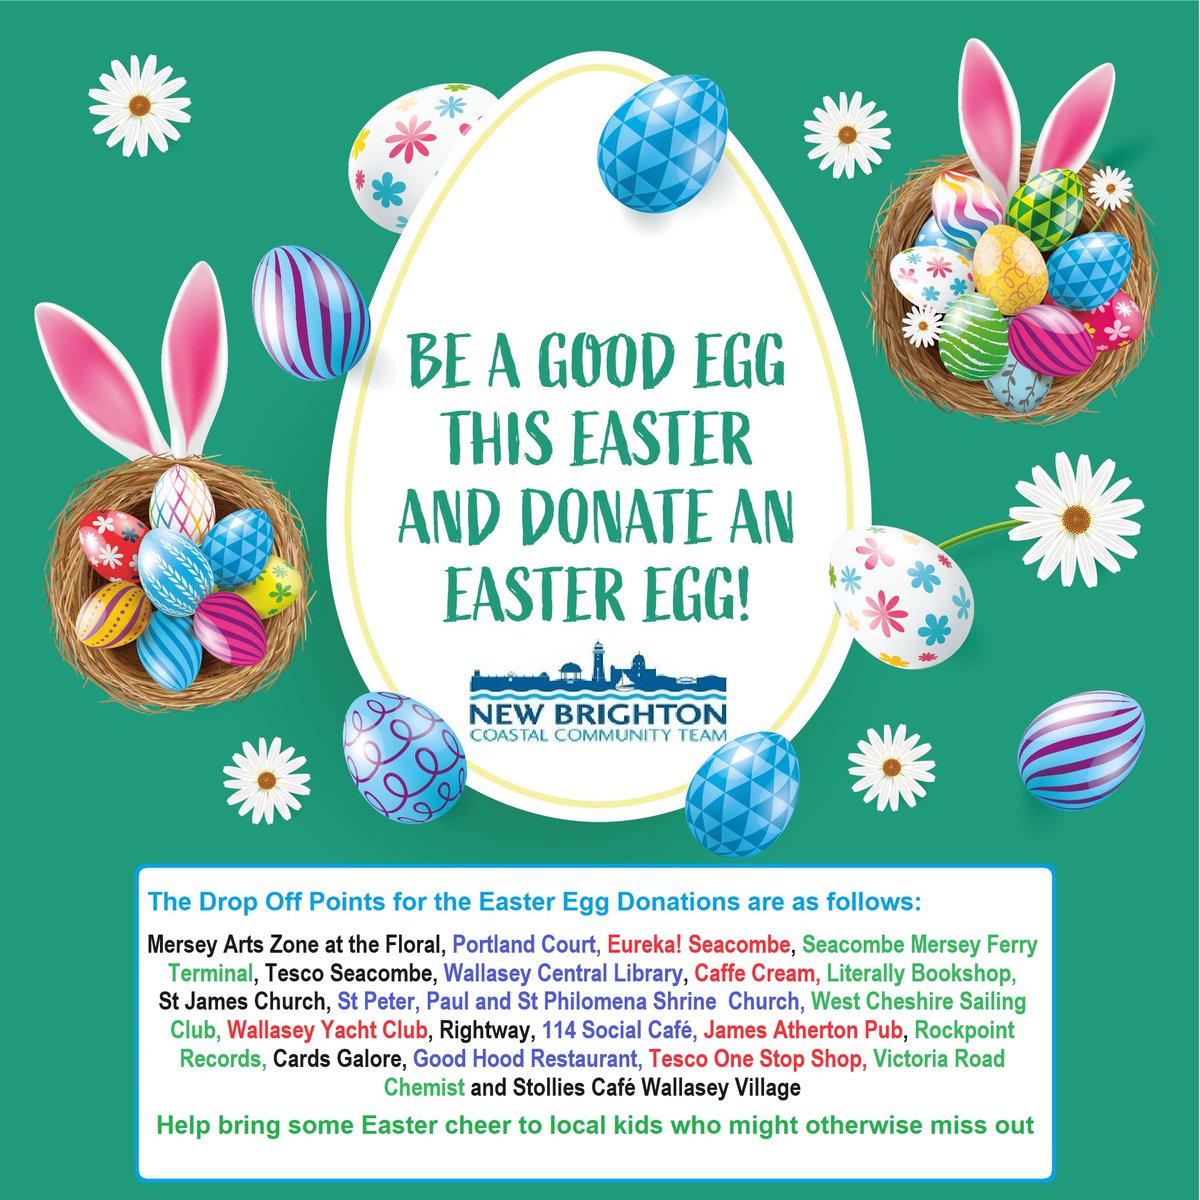 We are delighted to launch our annual New Brighton Coastal Community Team Easter Egg Appeal with 21 donation stations throughout the New Brighton, Wallasey and Seacombe area. Make sure no local child misses out by giving generously. Thanking you in advance!!